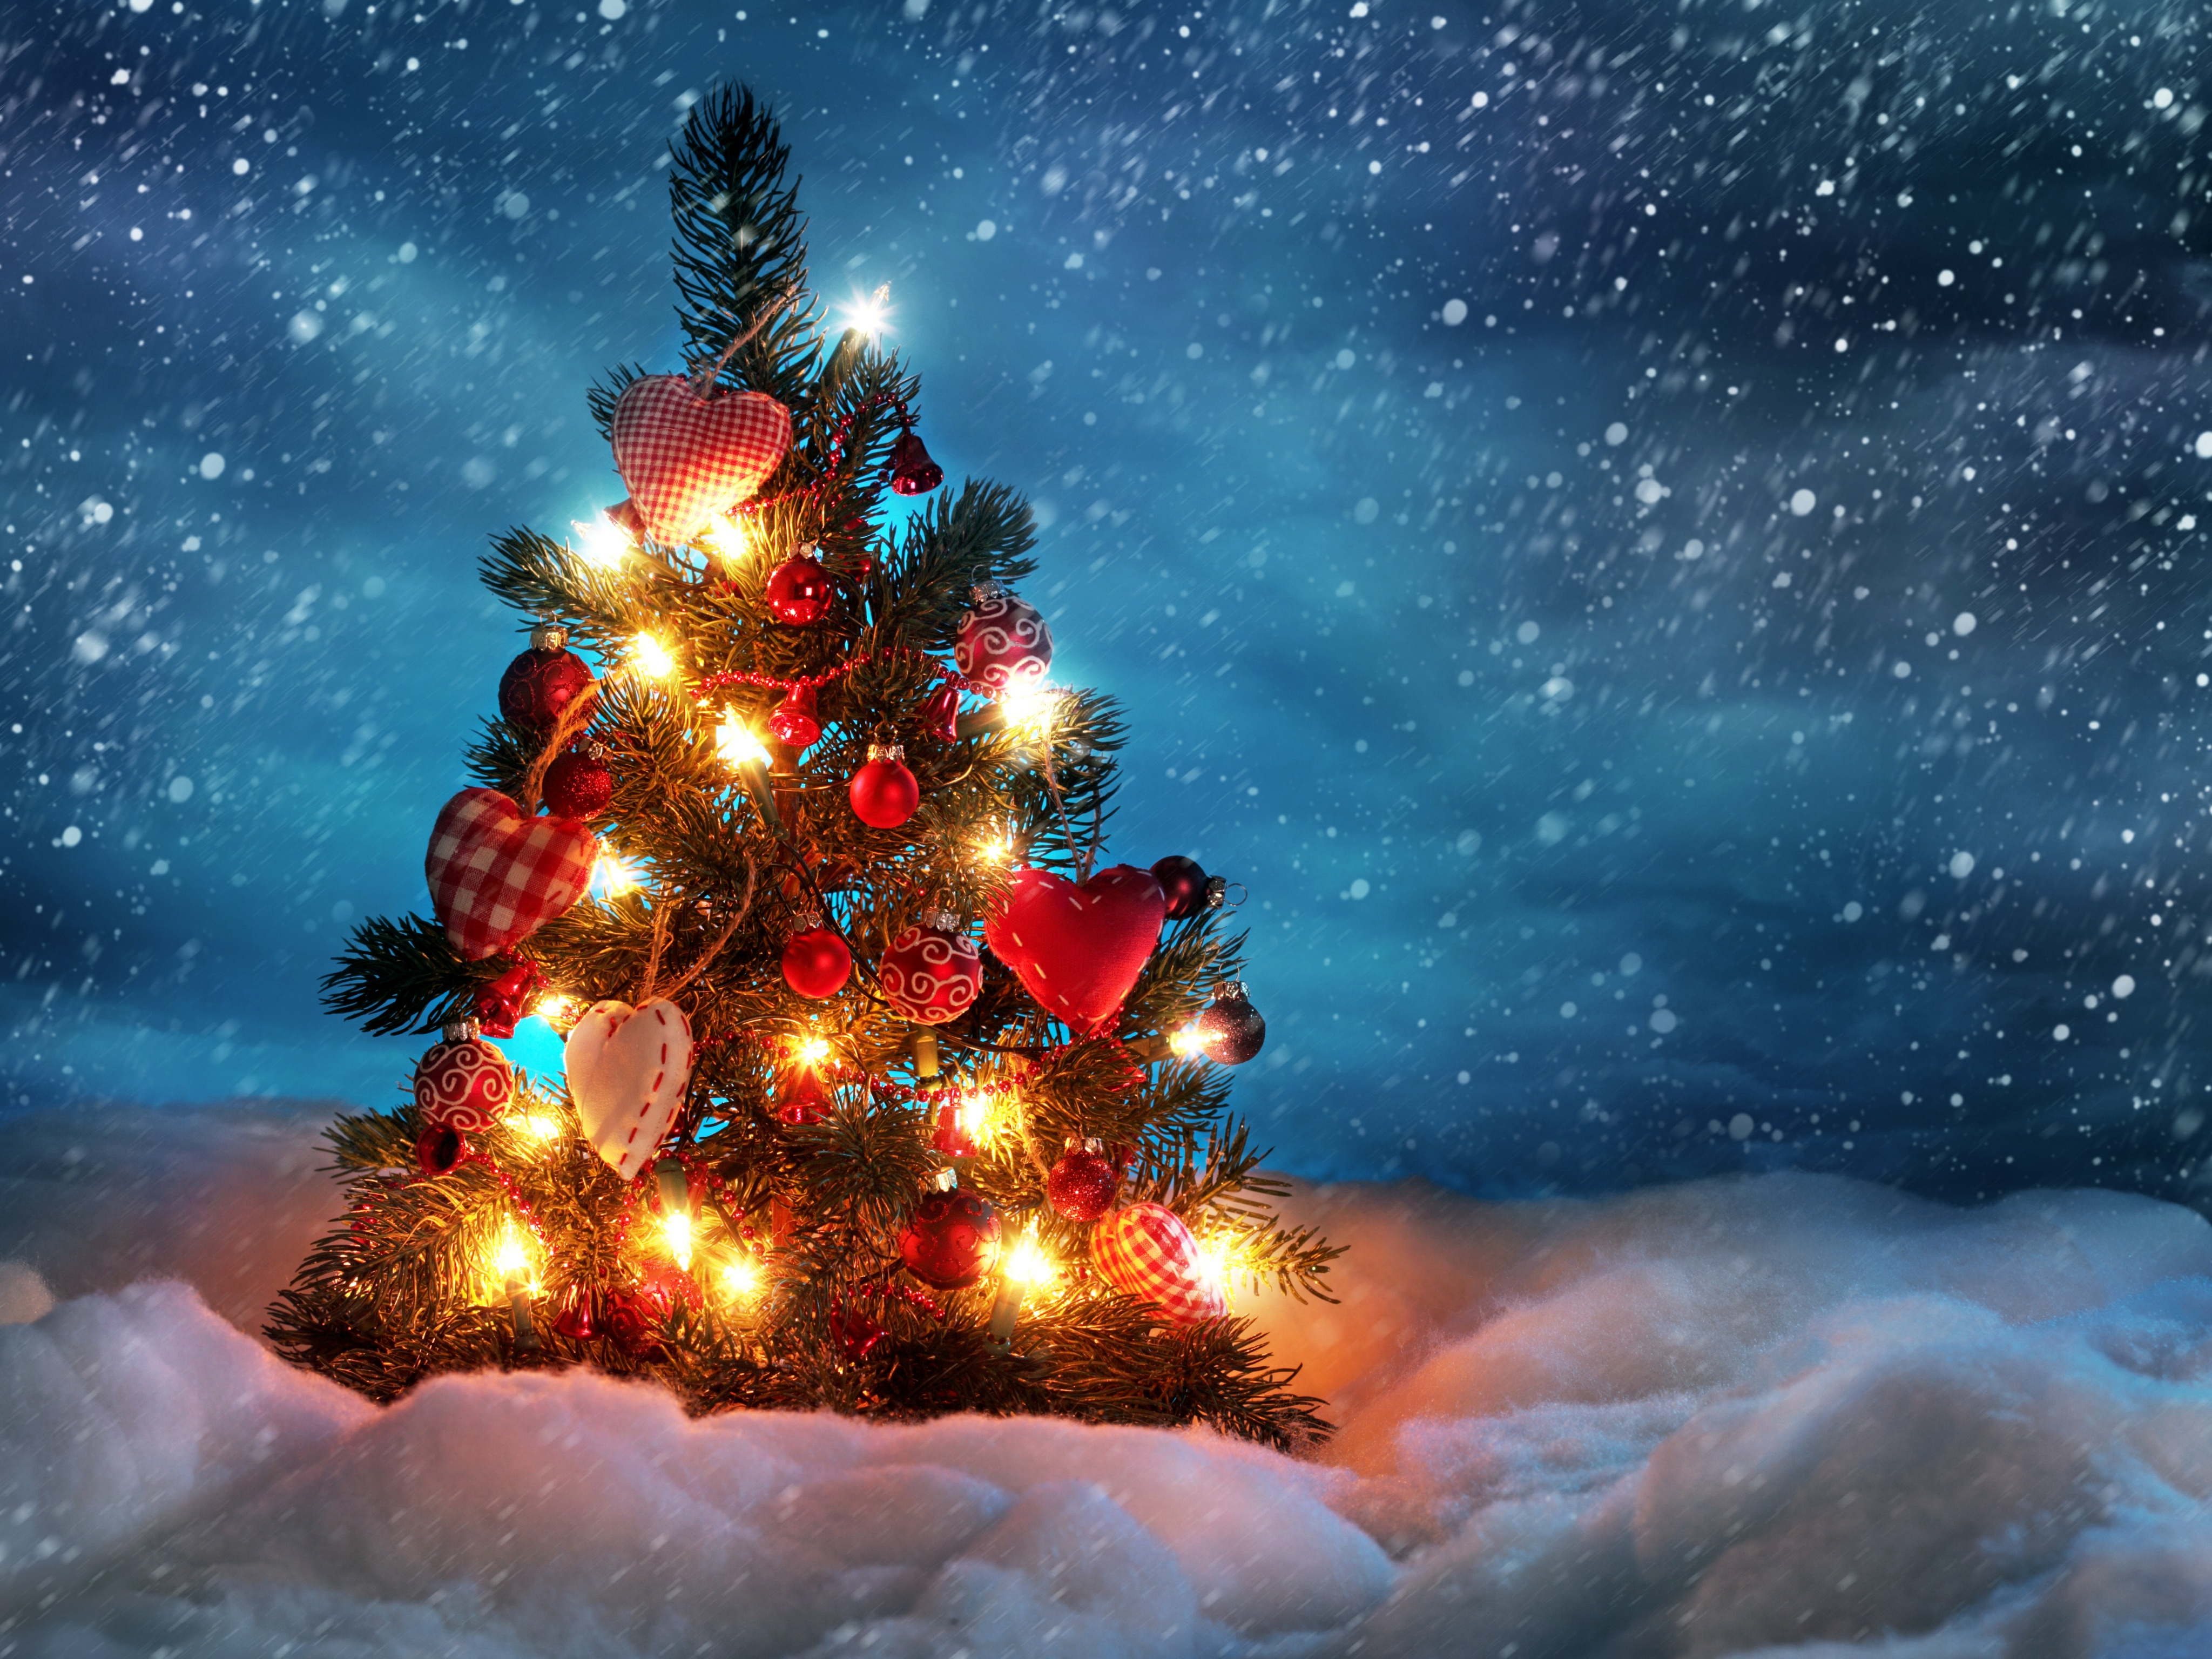 1300+ 4K Christmas Wallpapers | Background Images